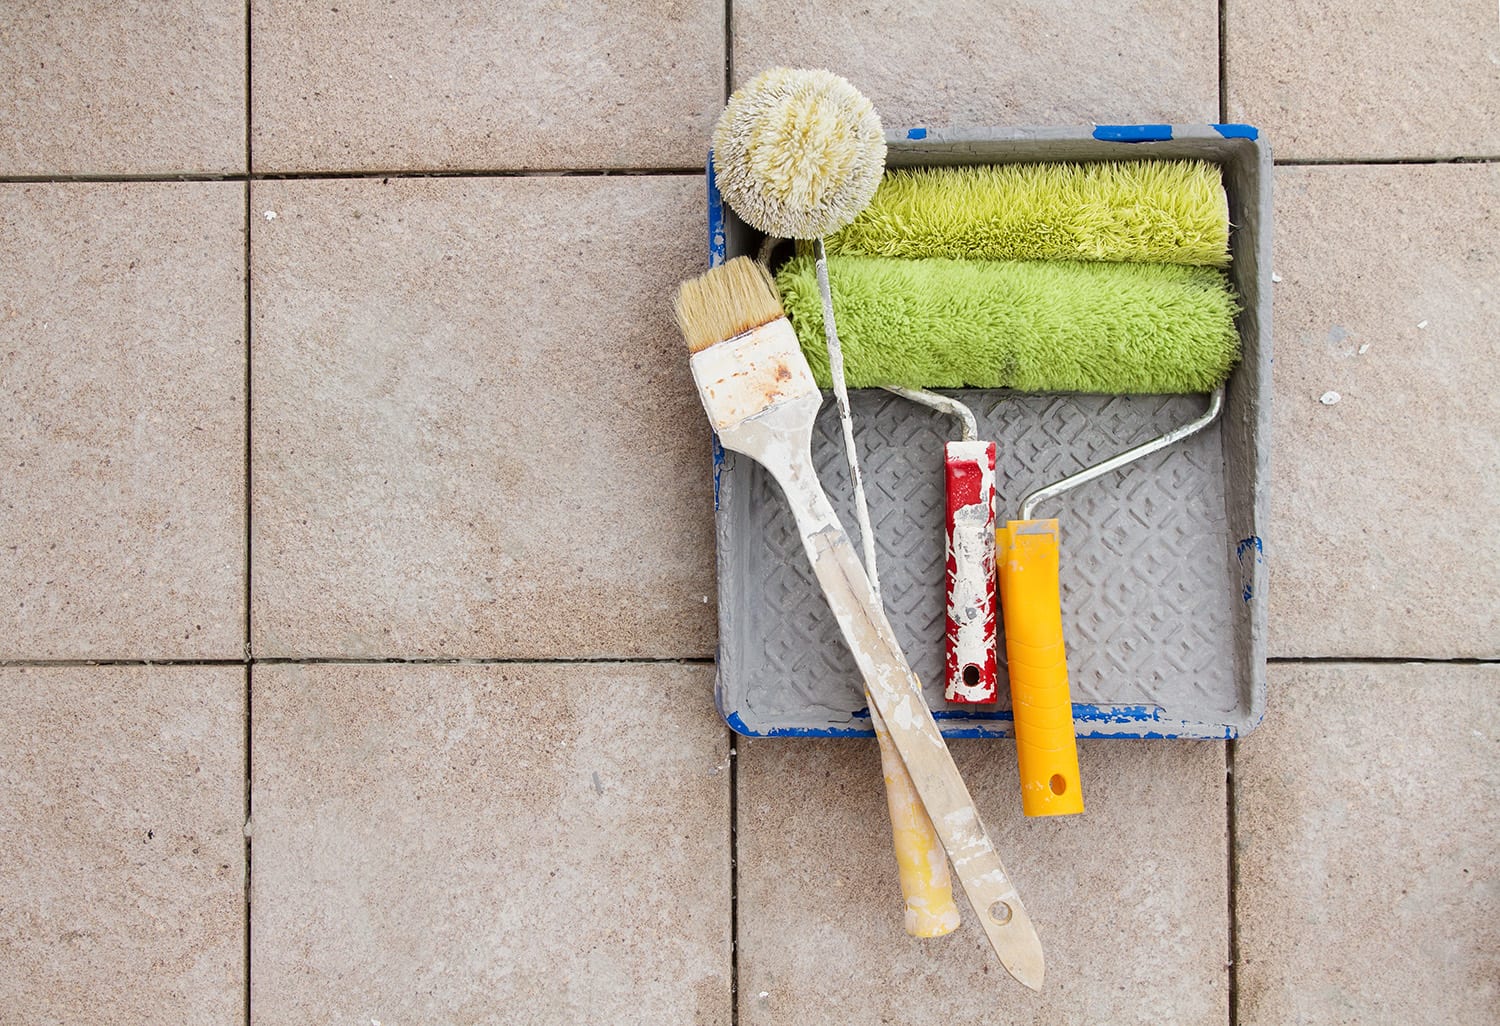 The Paint People guides you through how to paint floor tiles in today's article